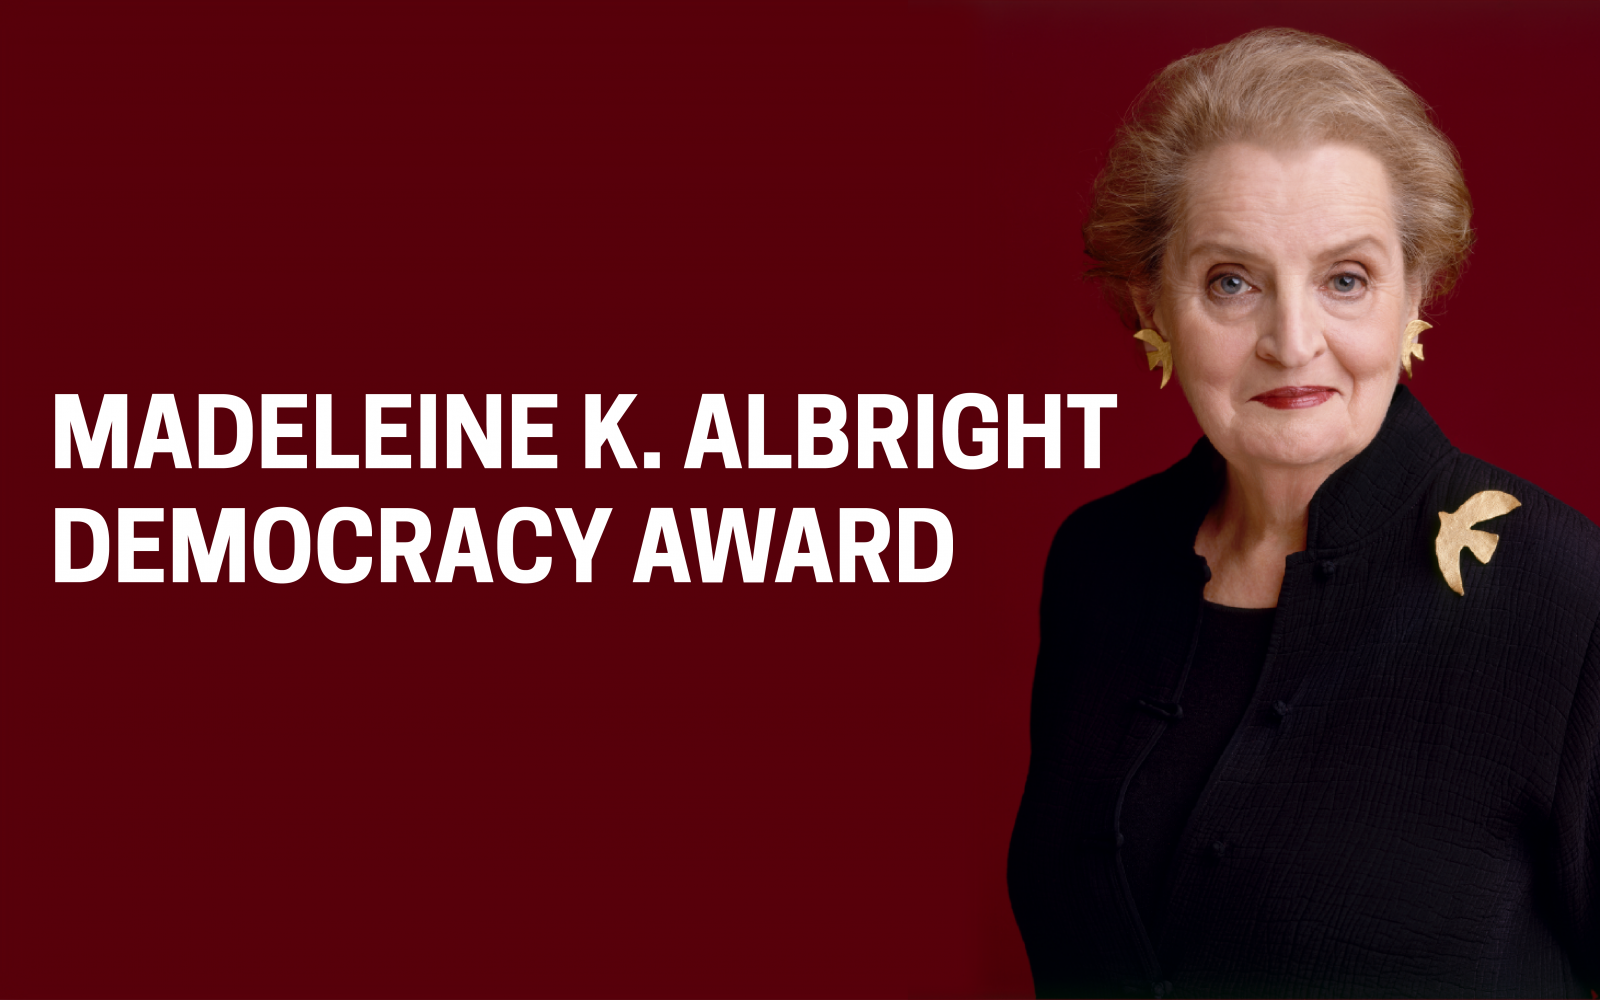 NDI Re-names Annual Democracy Award For Former Chair Madeleine K. Albright